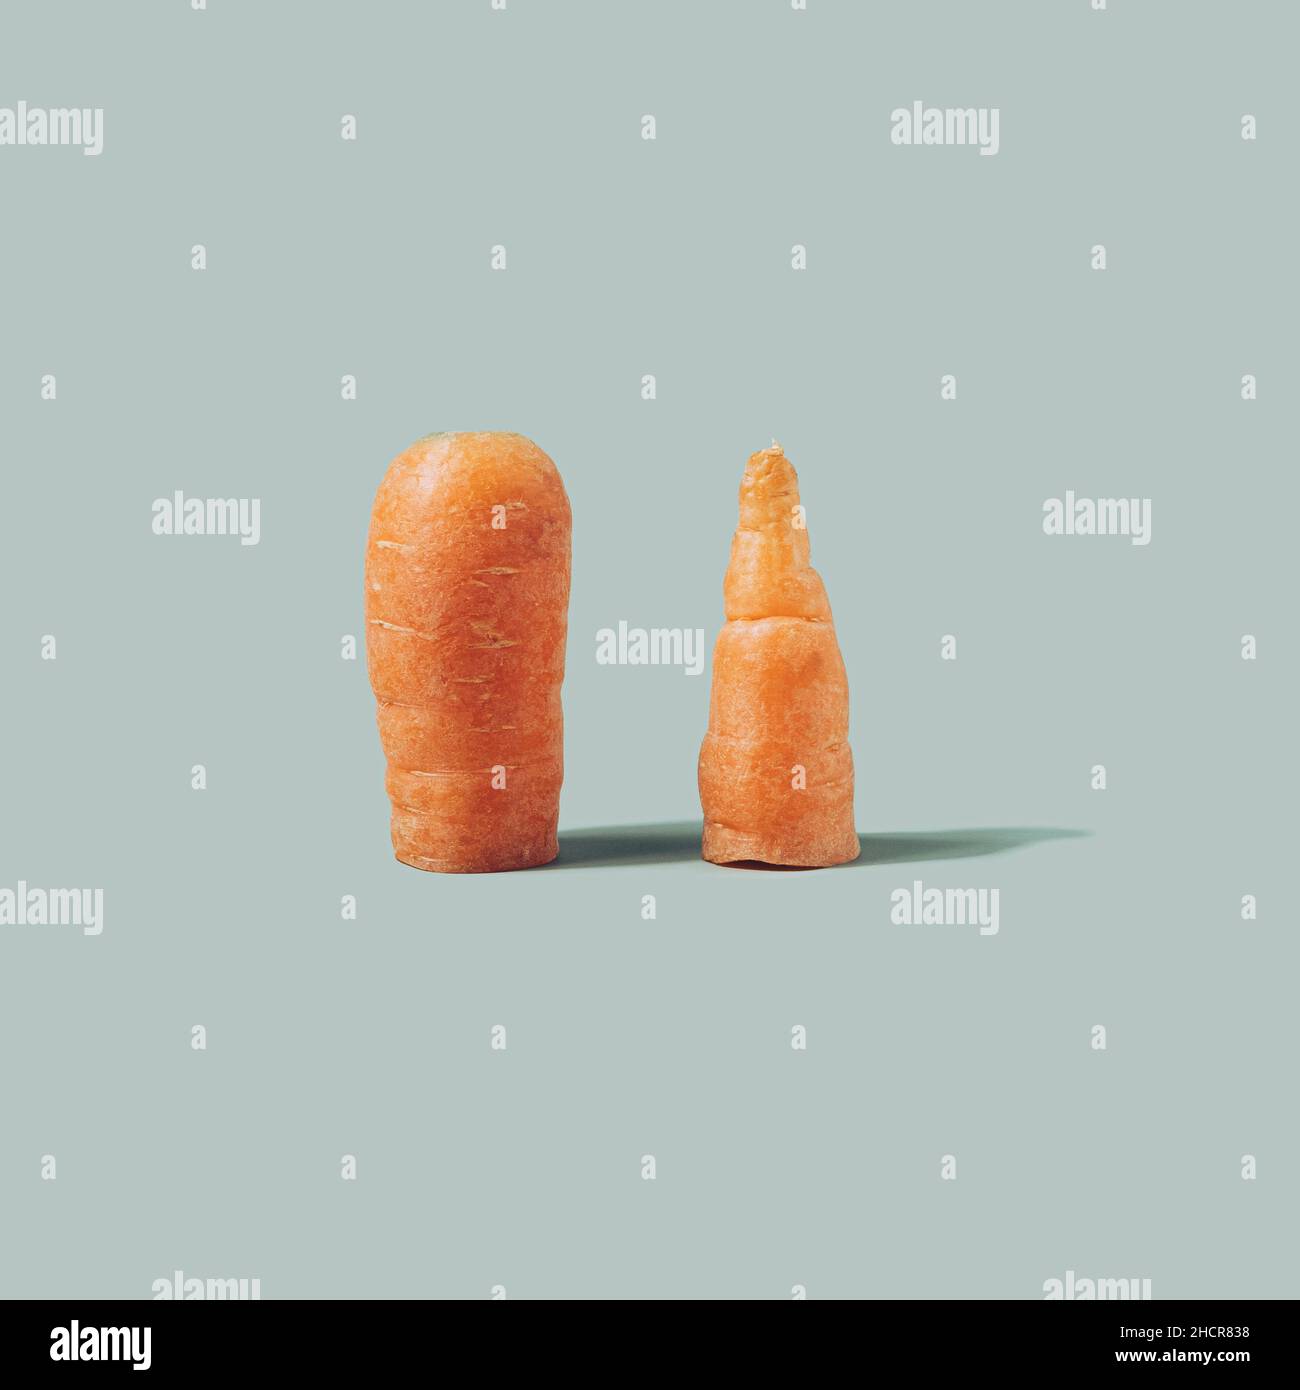 Fresh carrot sliced in half on a light green background. Healthy eating minimal concept Stock Photo